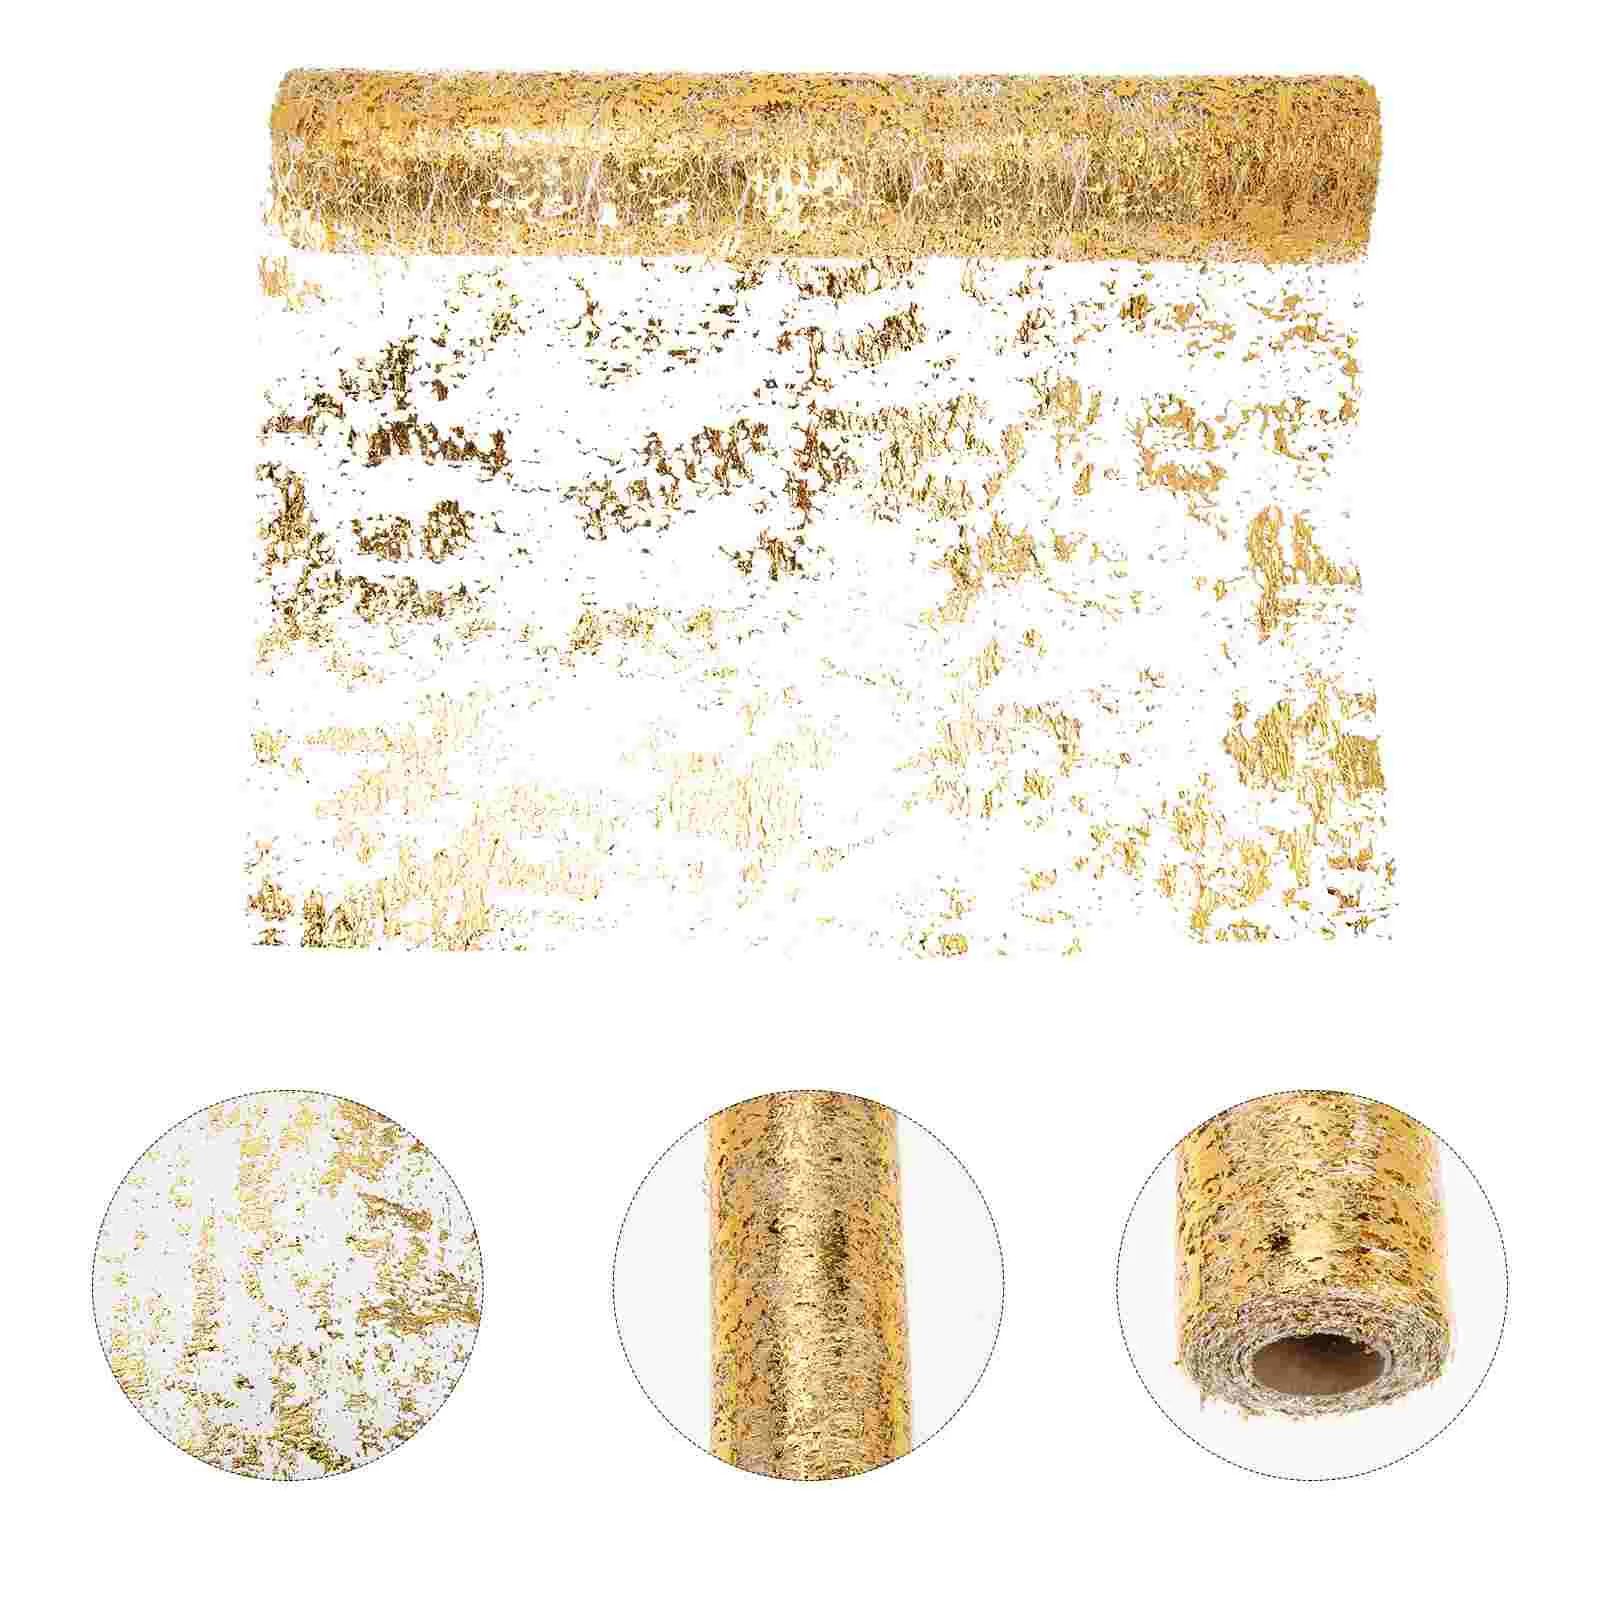 

Sparkle Metallic Gold Thin Table Runners Silver Sequin Glitter Metallic Mesh Party Table Decor For Wedding Banquet Birthday